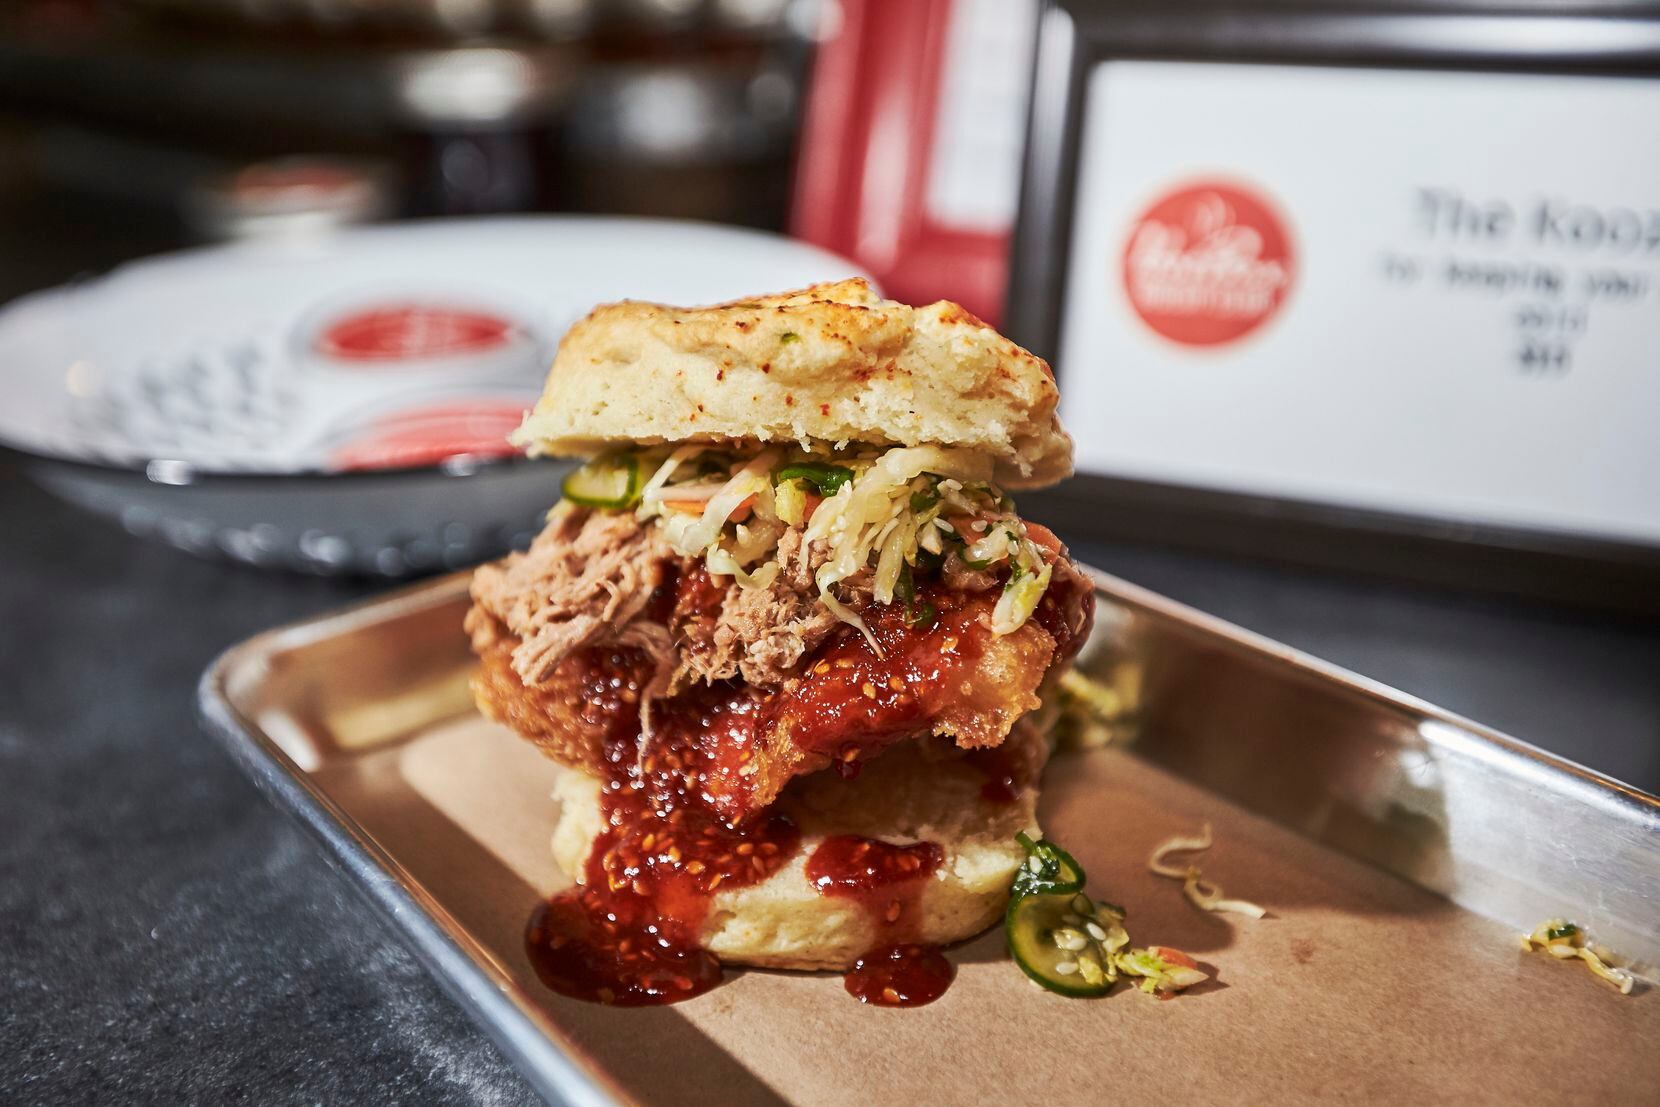 "Hot Box in Tokyo," includes fried chicken, gochujang glaze, pulled pork and Asian slaw, during a pop-up brunch held by Hot Box Biscuits Club at Tokyo Cafe.